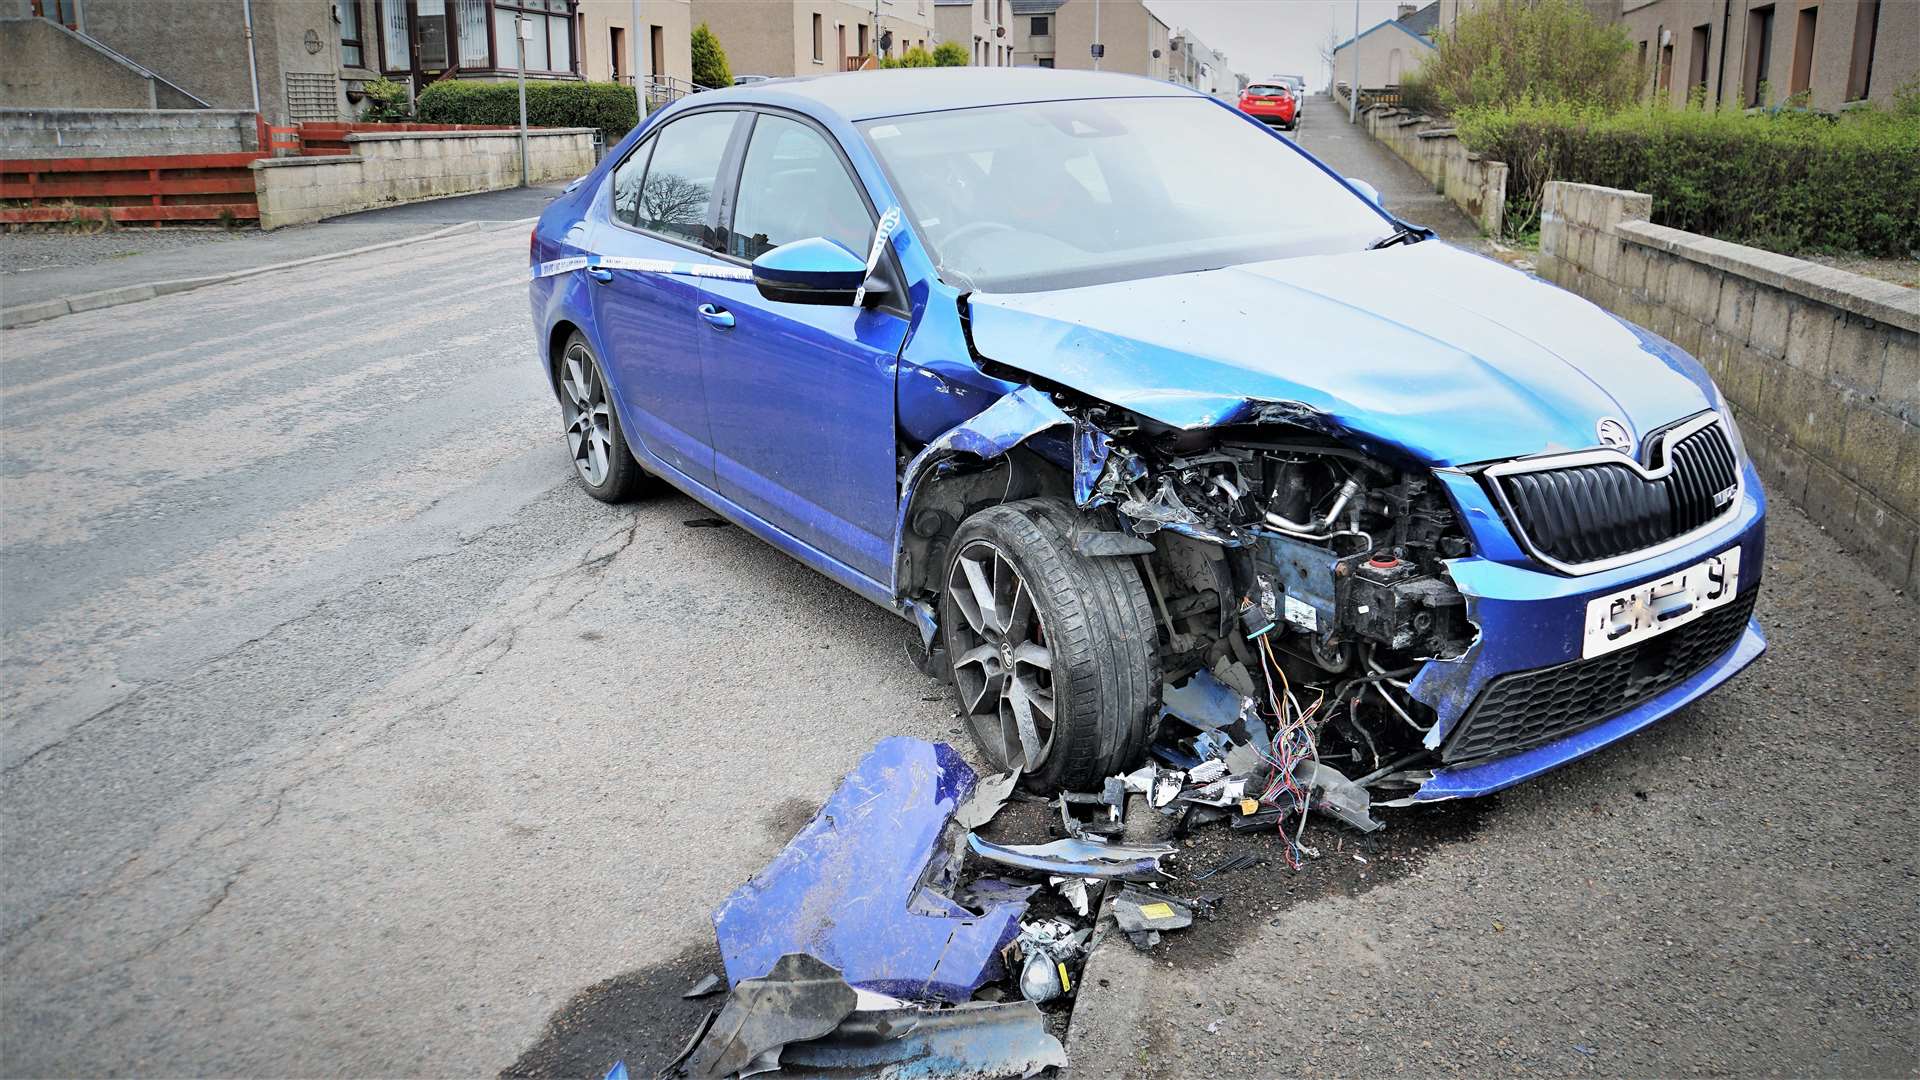 The car was shunted along the road by about 10 metres from the force of the impact. Picture: DGS